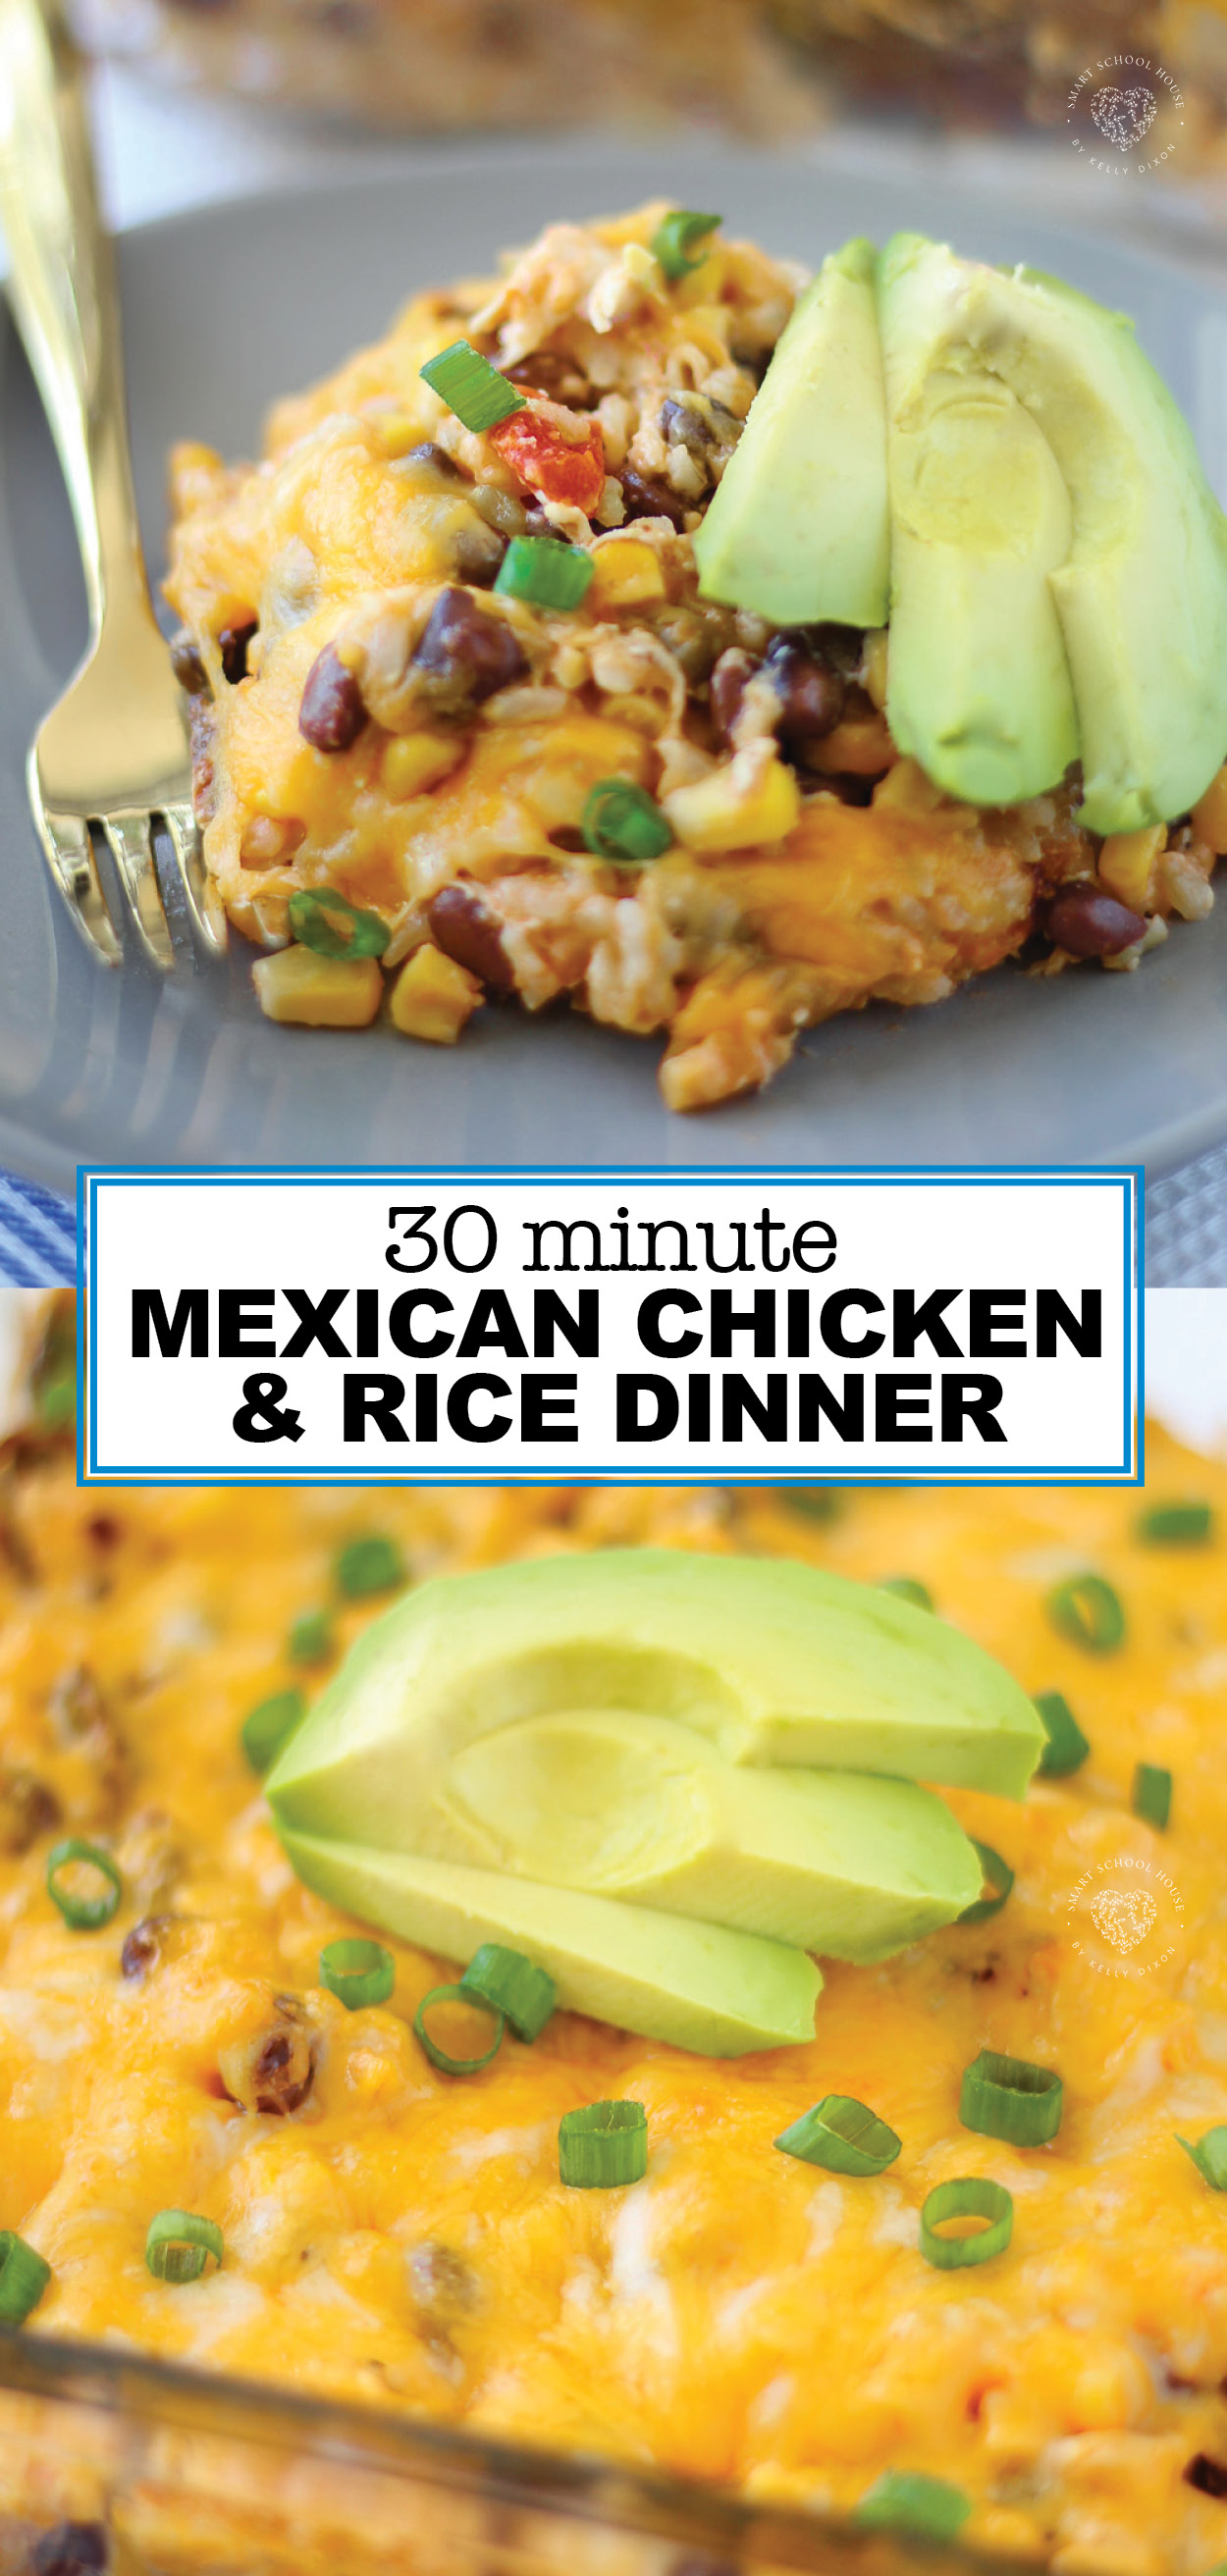 Mexican Chicken and Rice Dinner